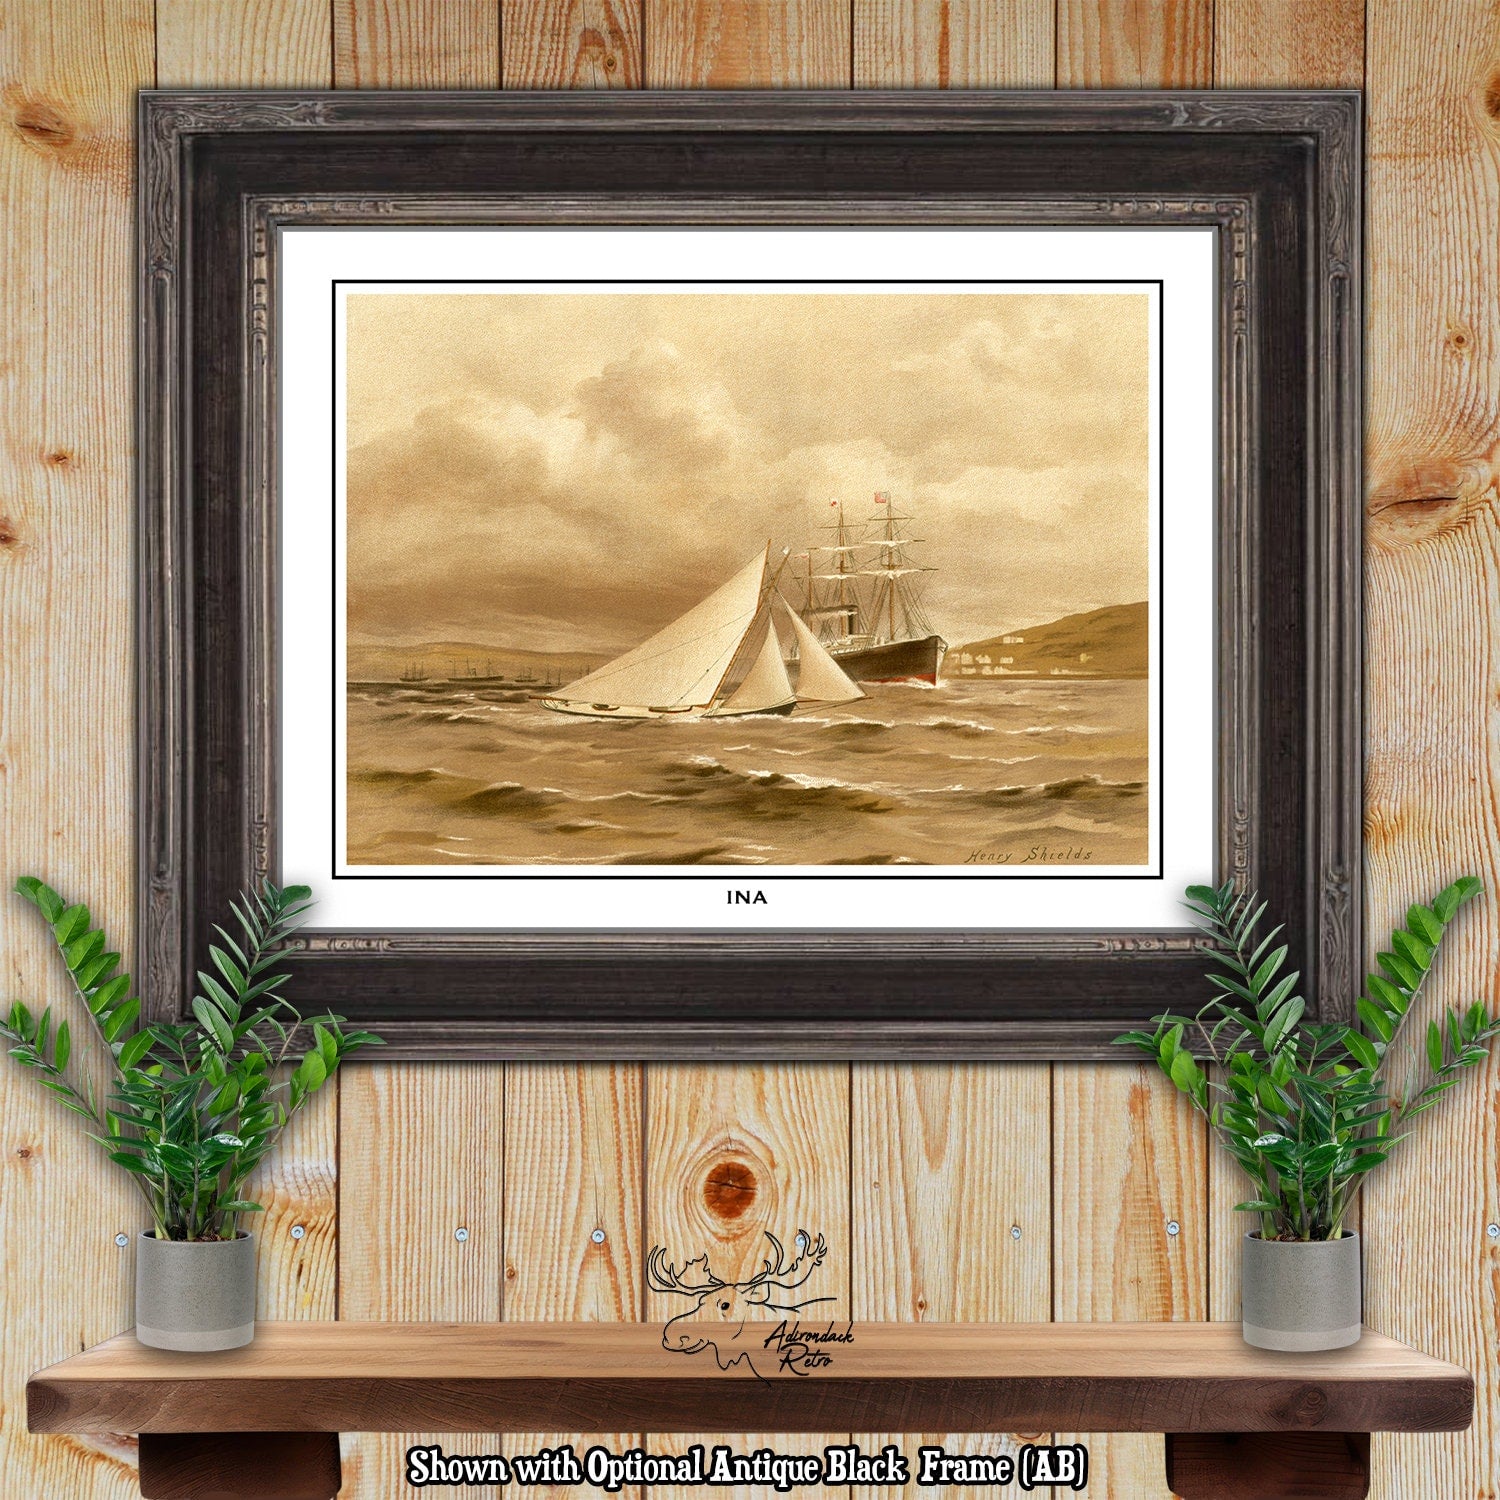 Clyde Yacht Ina by Henry Shields Giclee Fine Art Print at Adirondack Retro